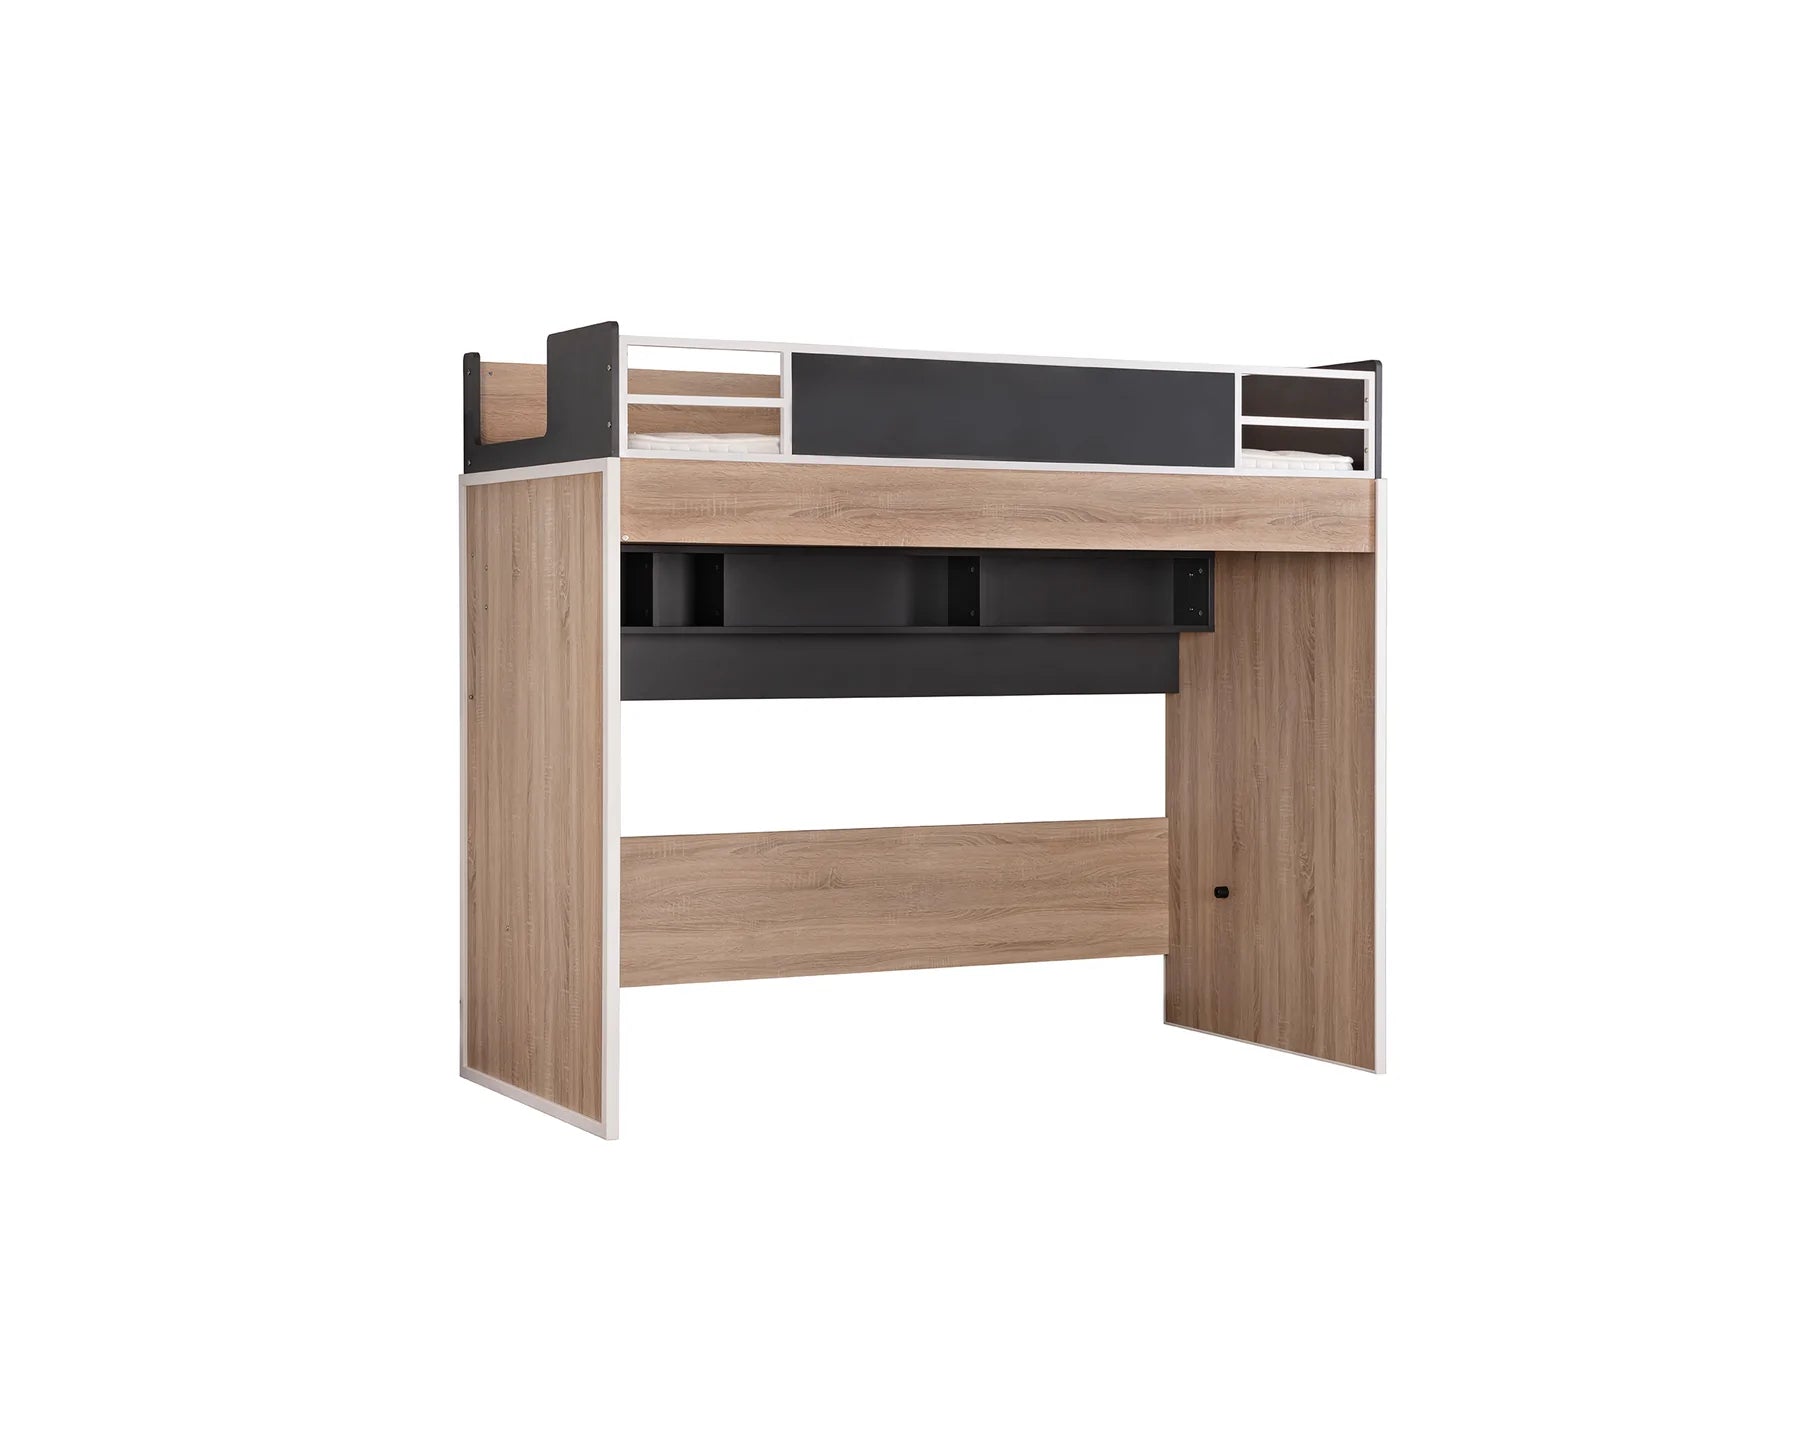 NEW CITY LOFT BED WITH DESK GREY - Zoomie Beds